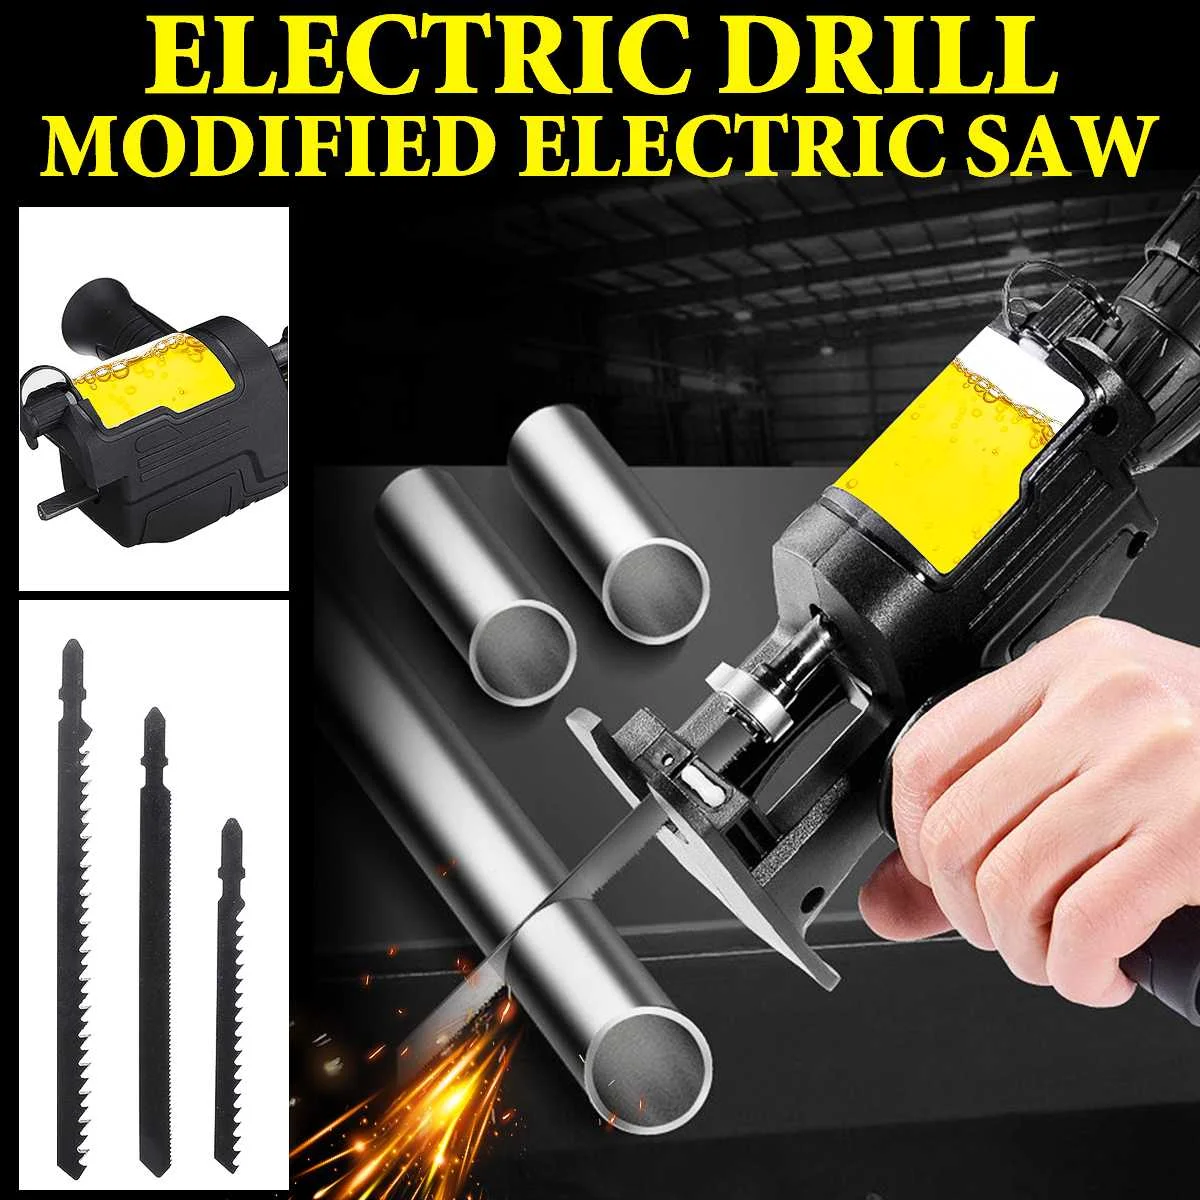 Portable Cordless Reciprocating Saw Adapter Electric Drill To Electric Saw for Wood Metal Cutting Power Tools &Saw Blade+Oil Can